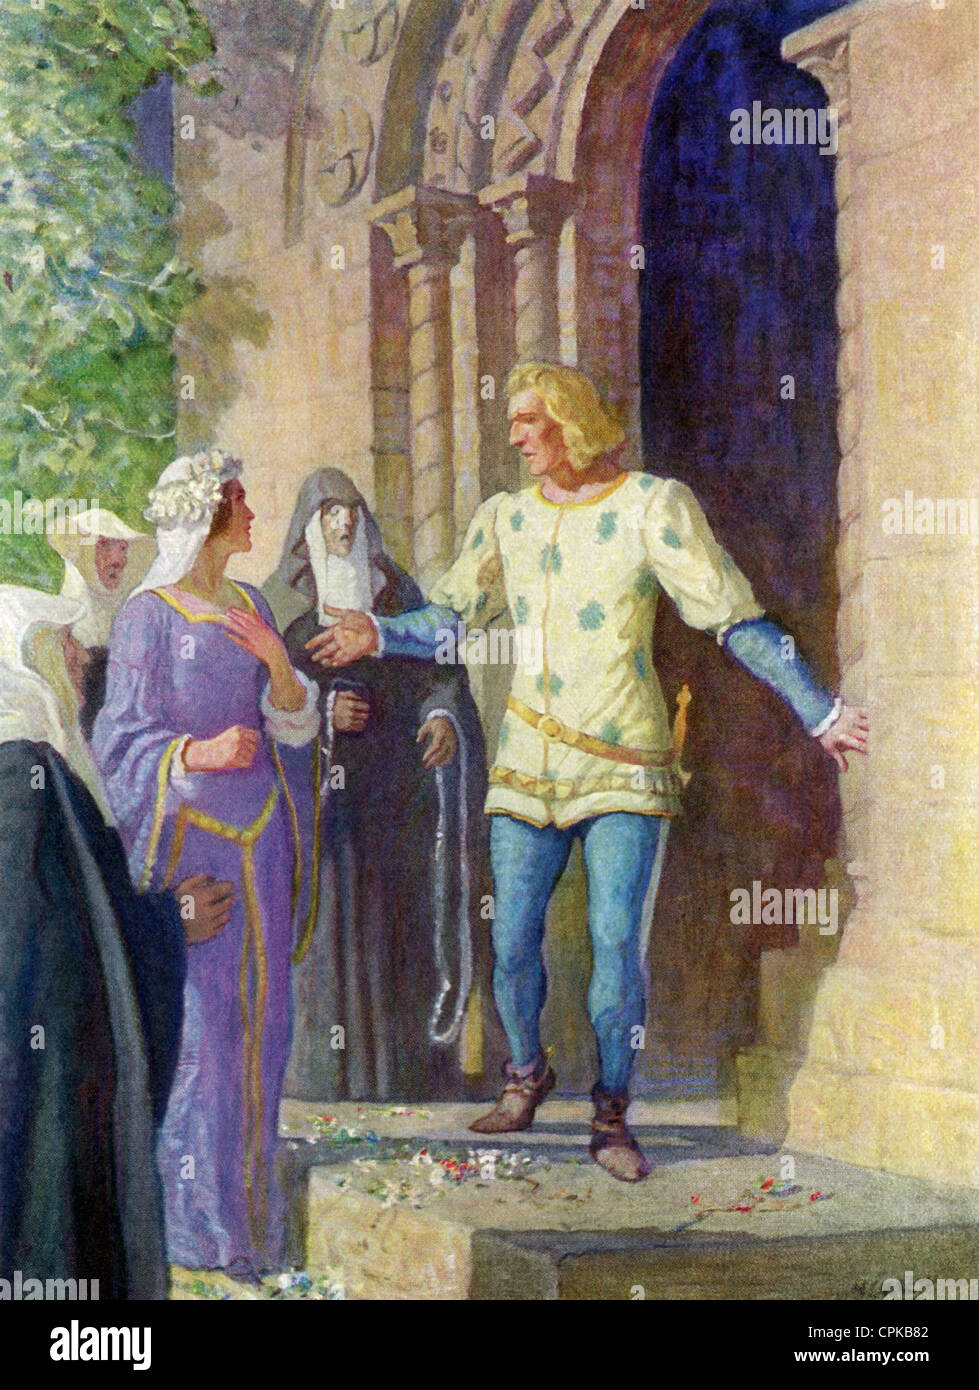 Alleyne, a member of the White Company, stands at the door of the church with Maude, just before they enter and are married. Stock Photo